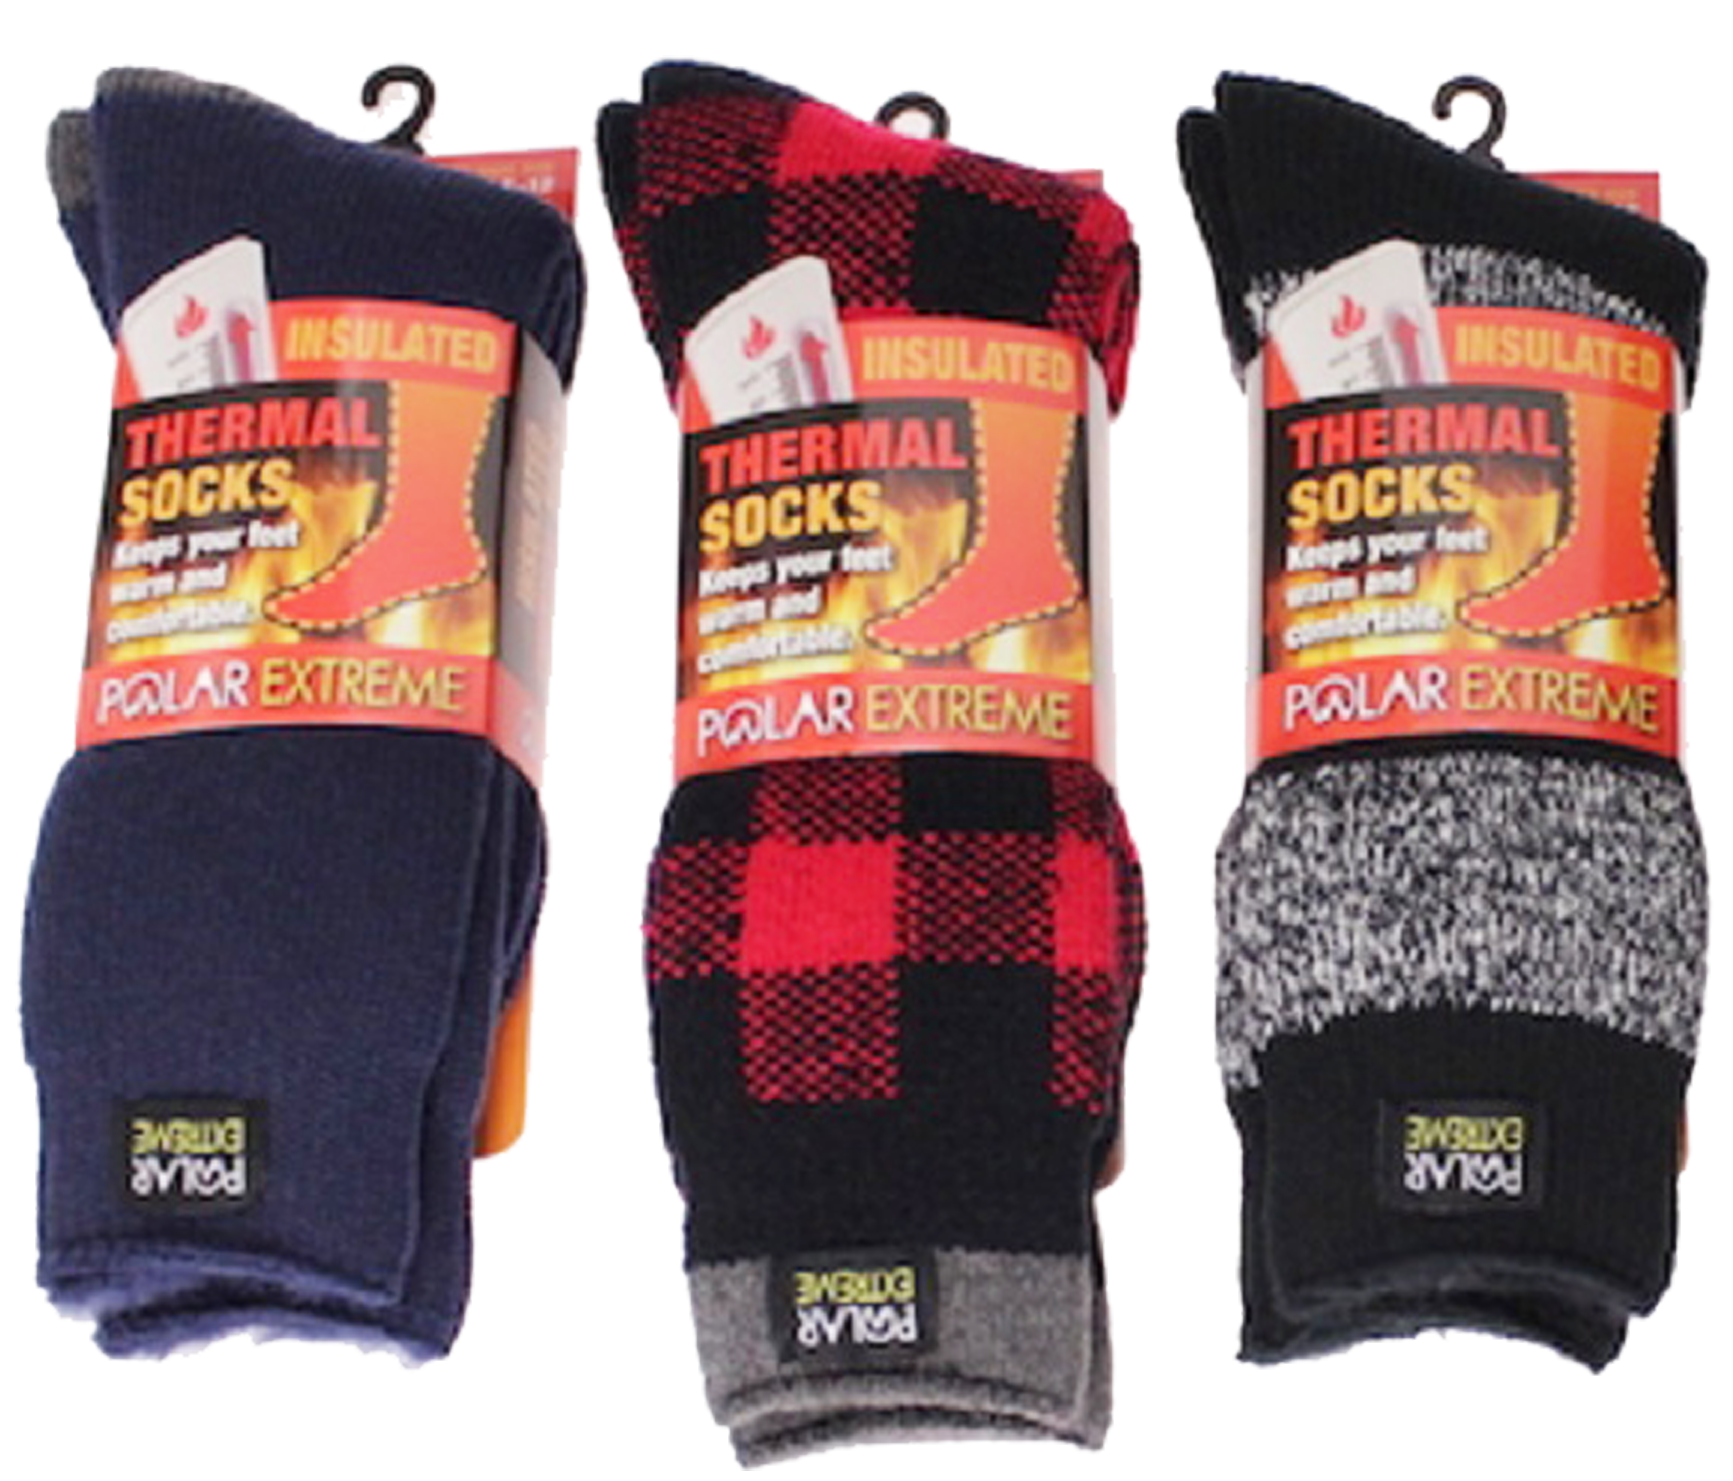 Polar Extreme Insulated Thermal Socks Women Fits Shoe Size 5-9 NEW 2 Pack